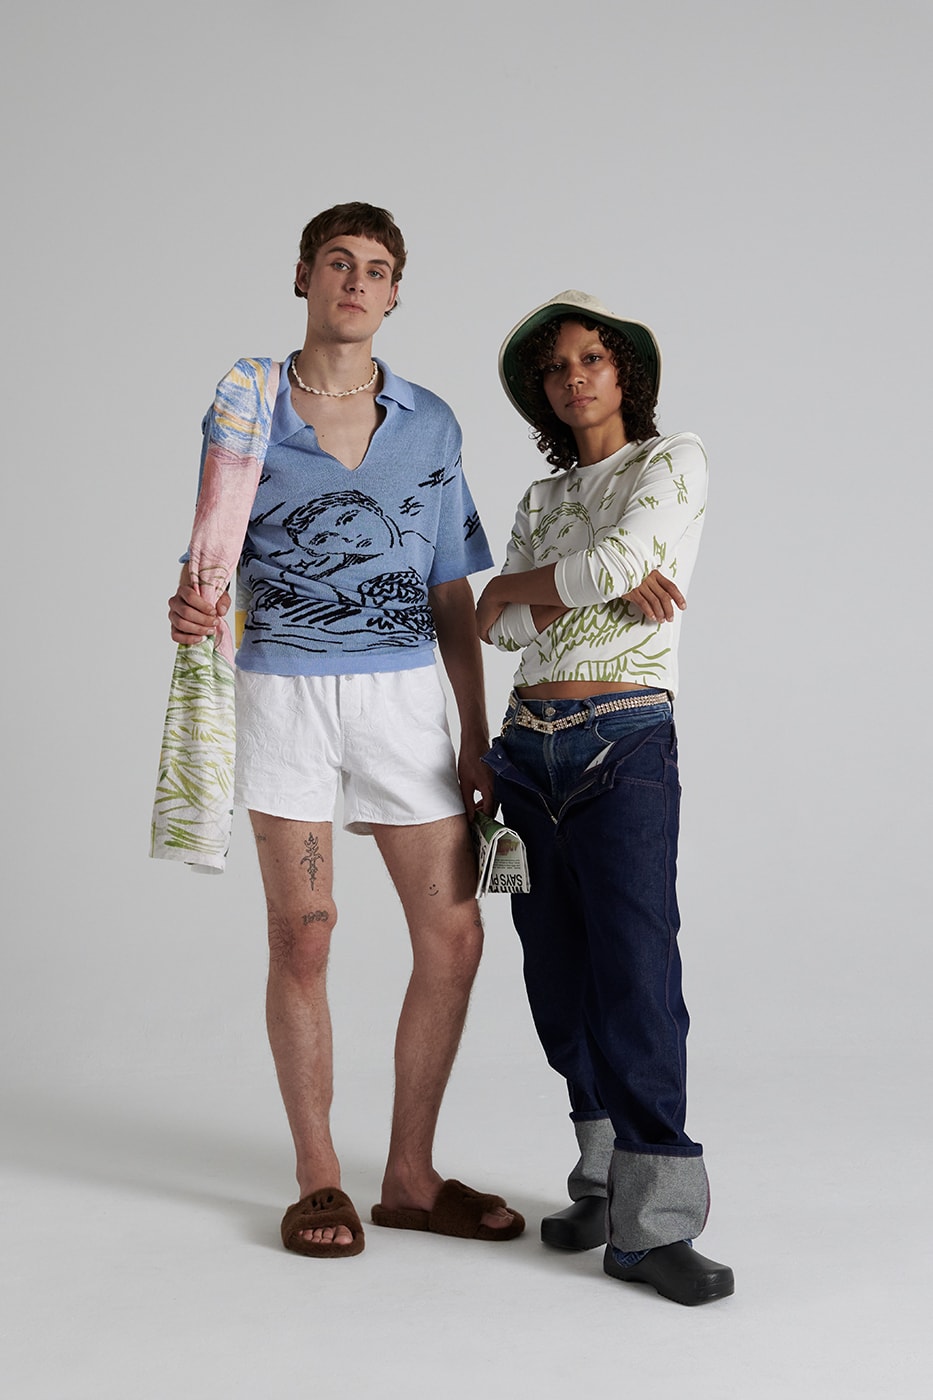 Carne Bollente SS23 Celebrates Breaking Conventionalities spring summer 2023 collection release lookbooks hijiri paris sex positive brand tom of finland camille potte jacques merle souvenir from us